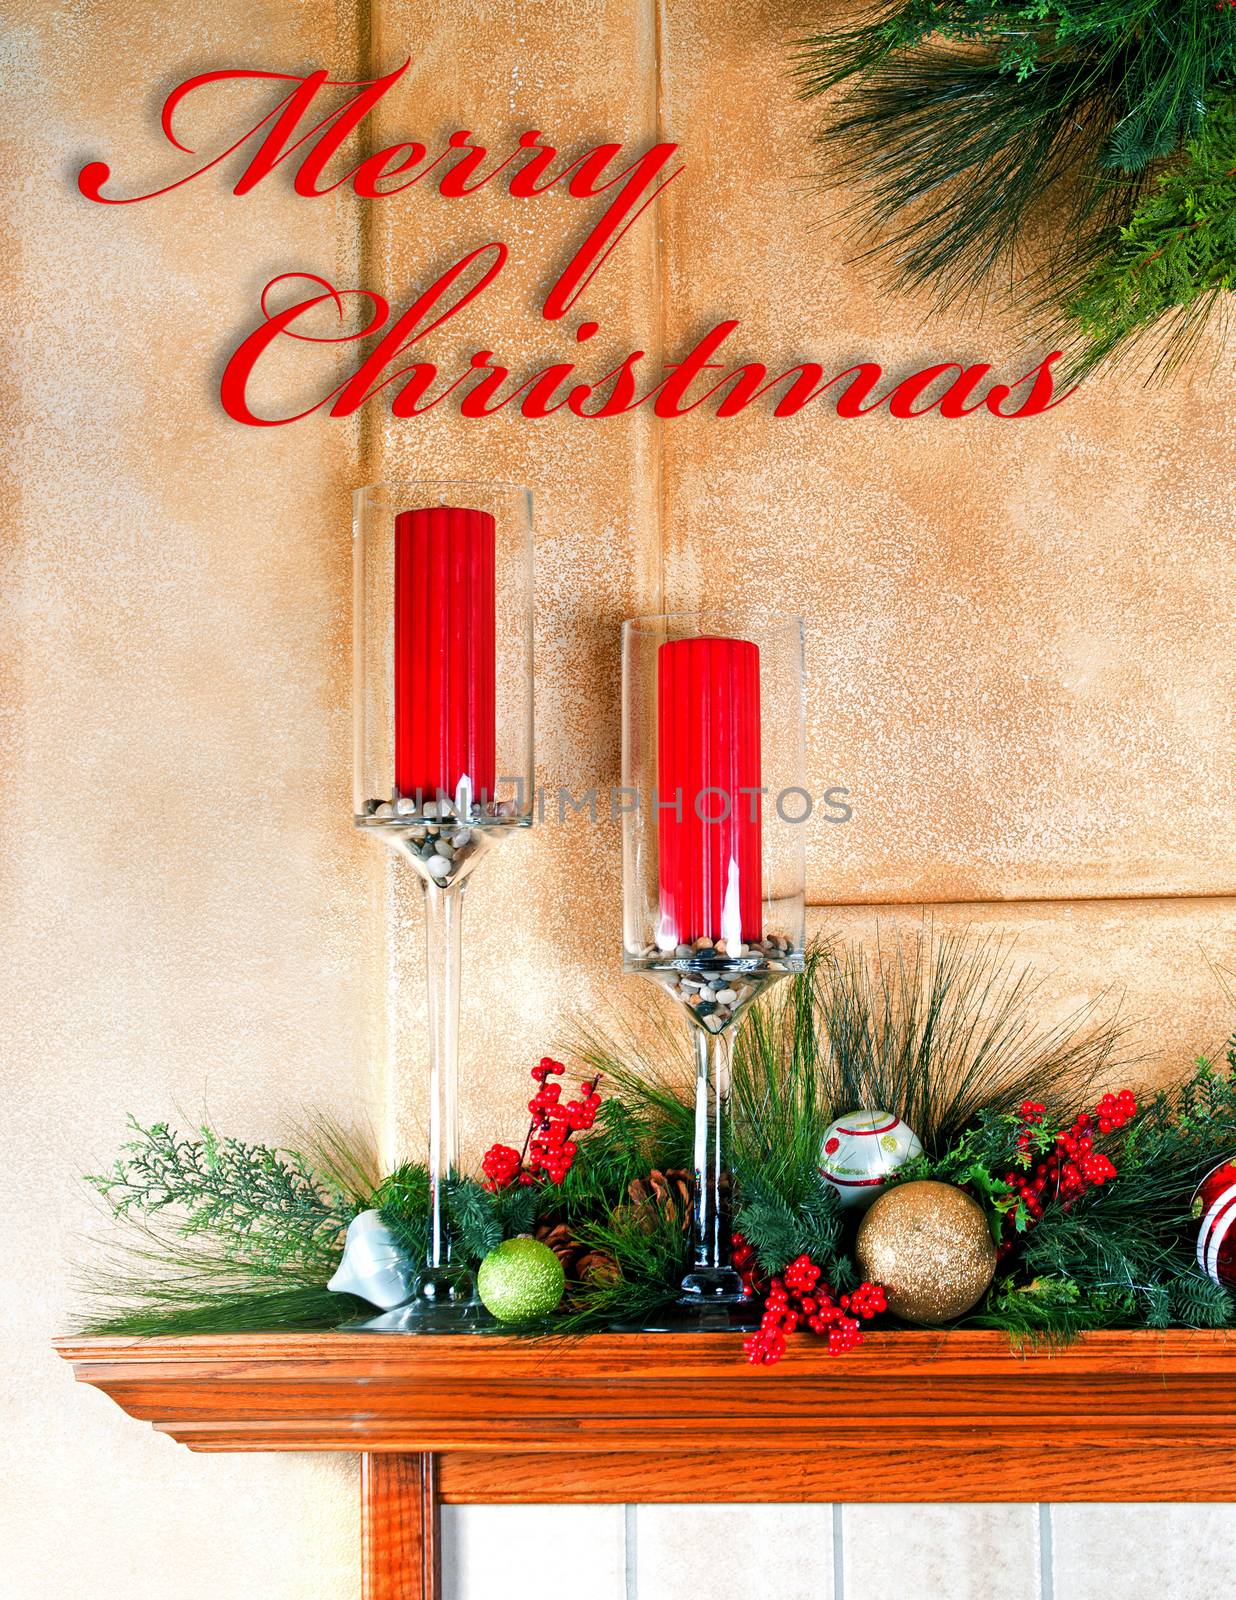 Candles Decorations On Fireplace Mantle Christmas Card by rcarner